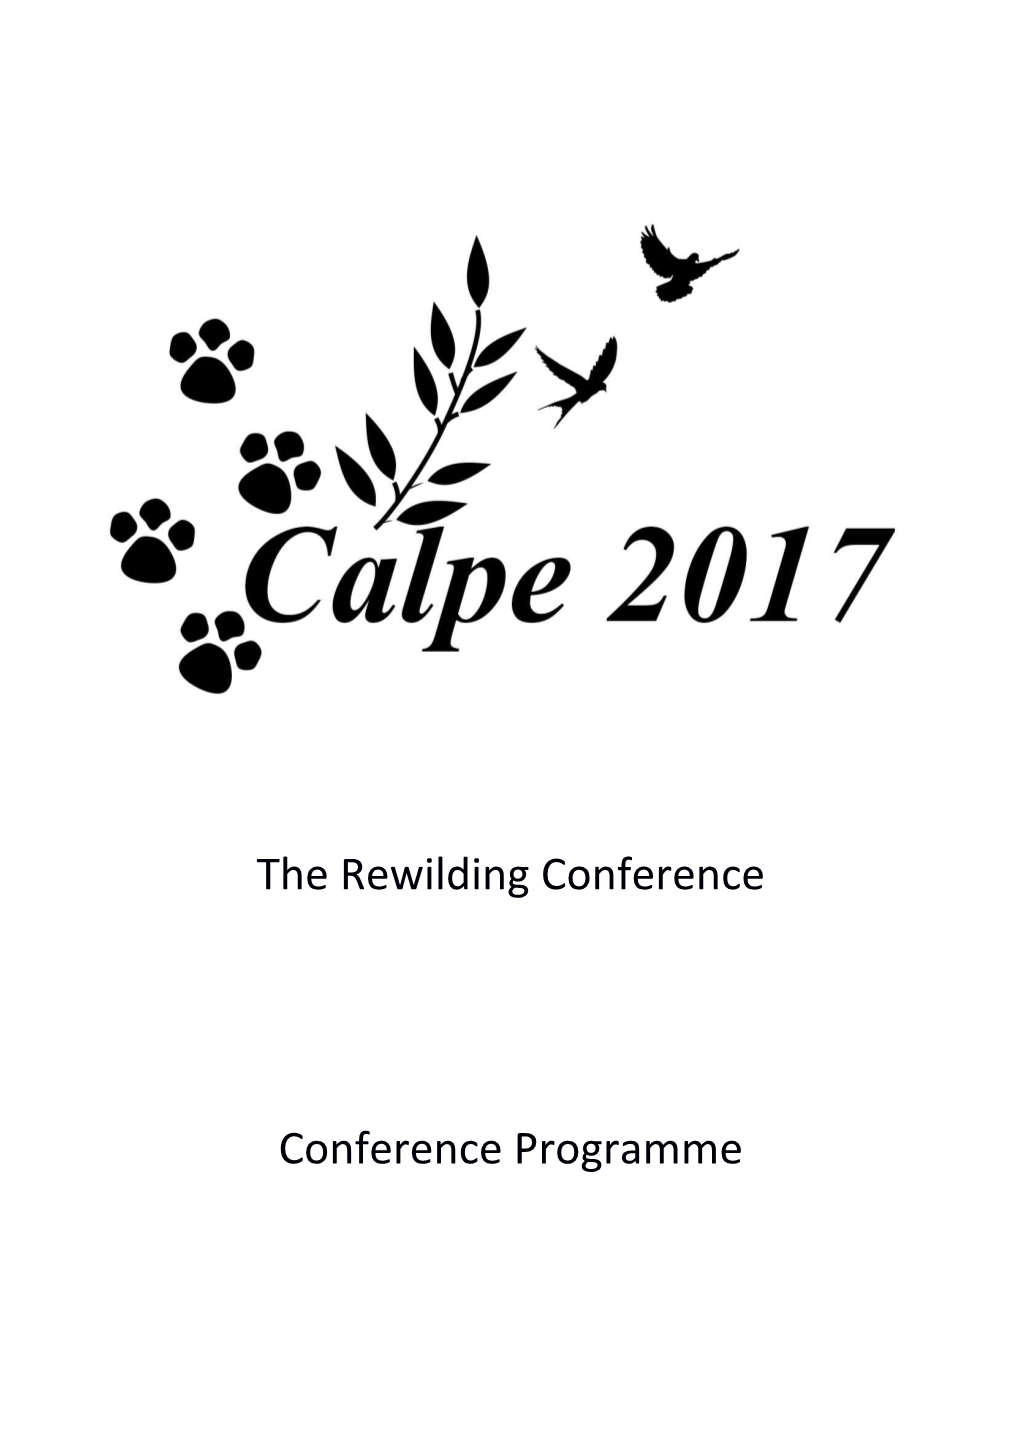 The Rewilding Conference